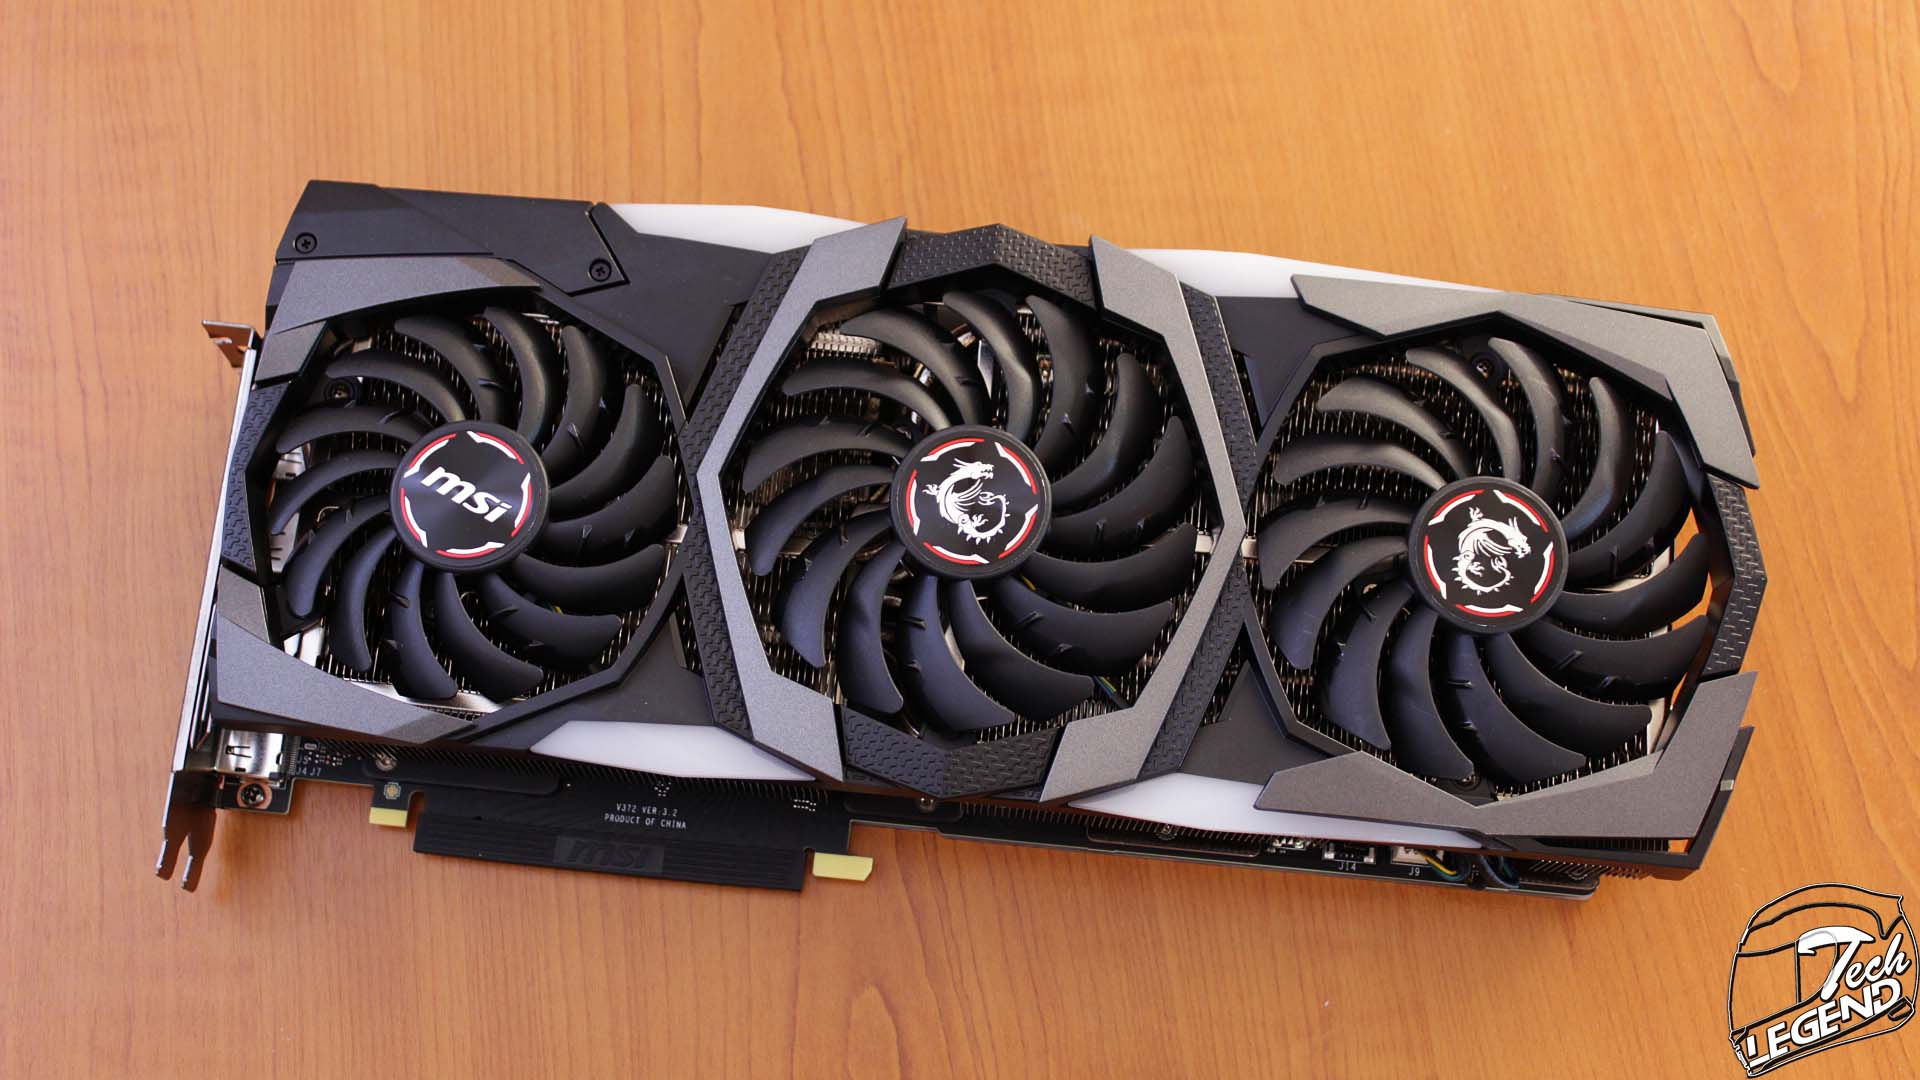 MSI GeForce RTX 2070 Super Gaming X Trio - Graphics Card Review